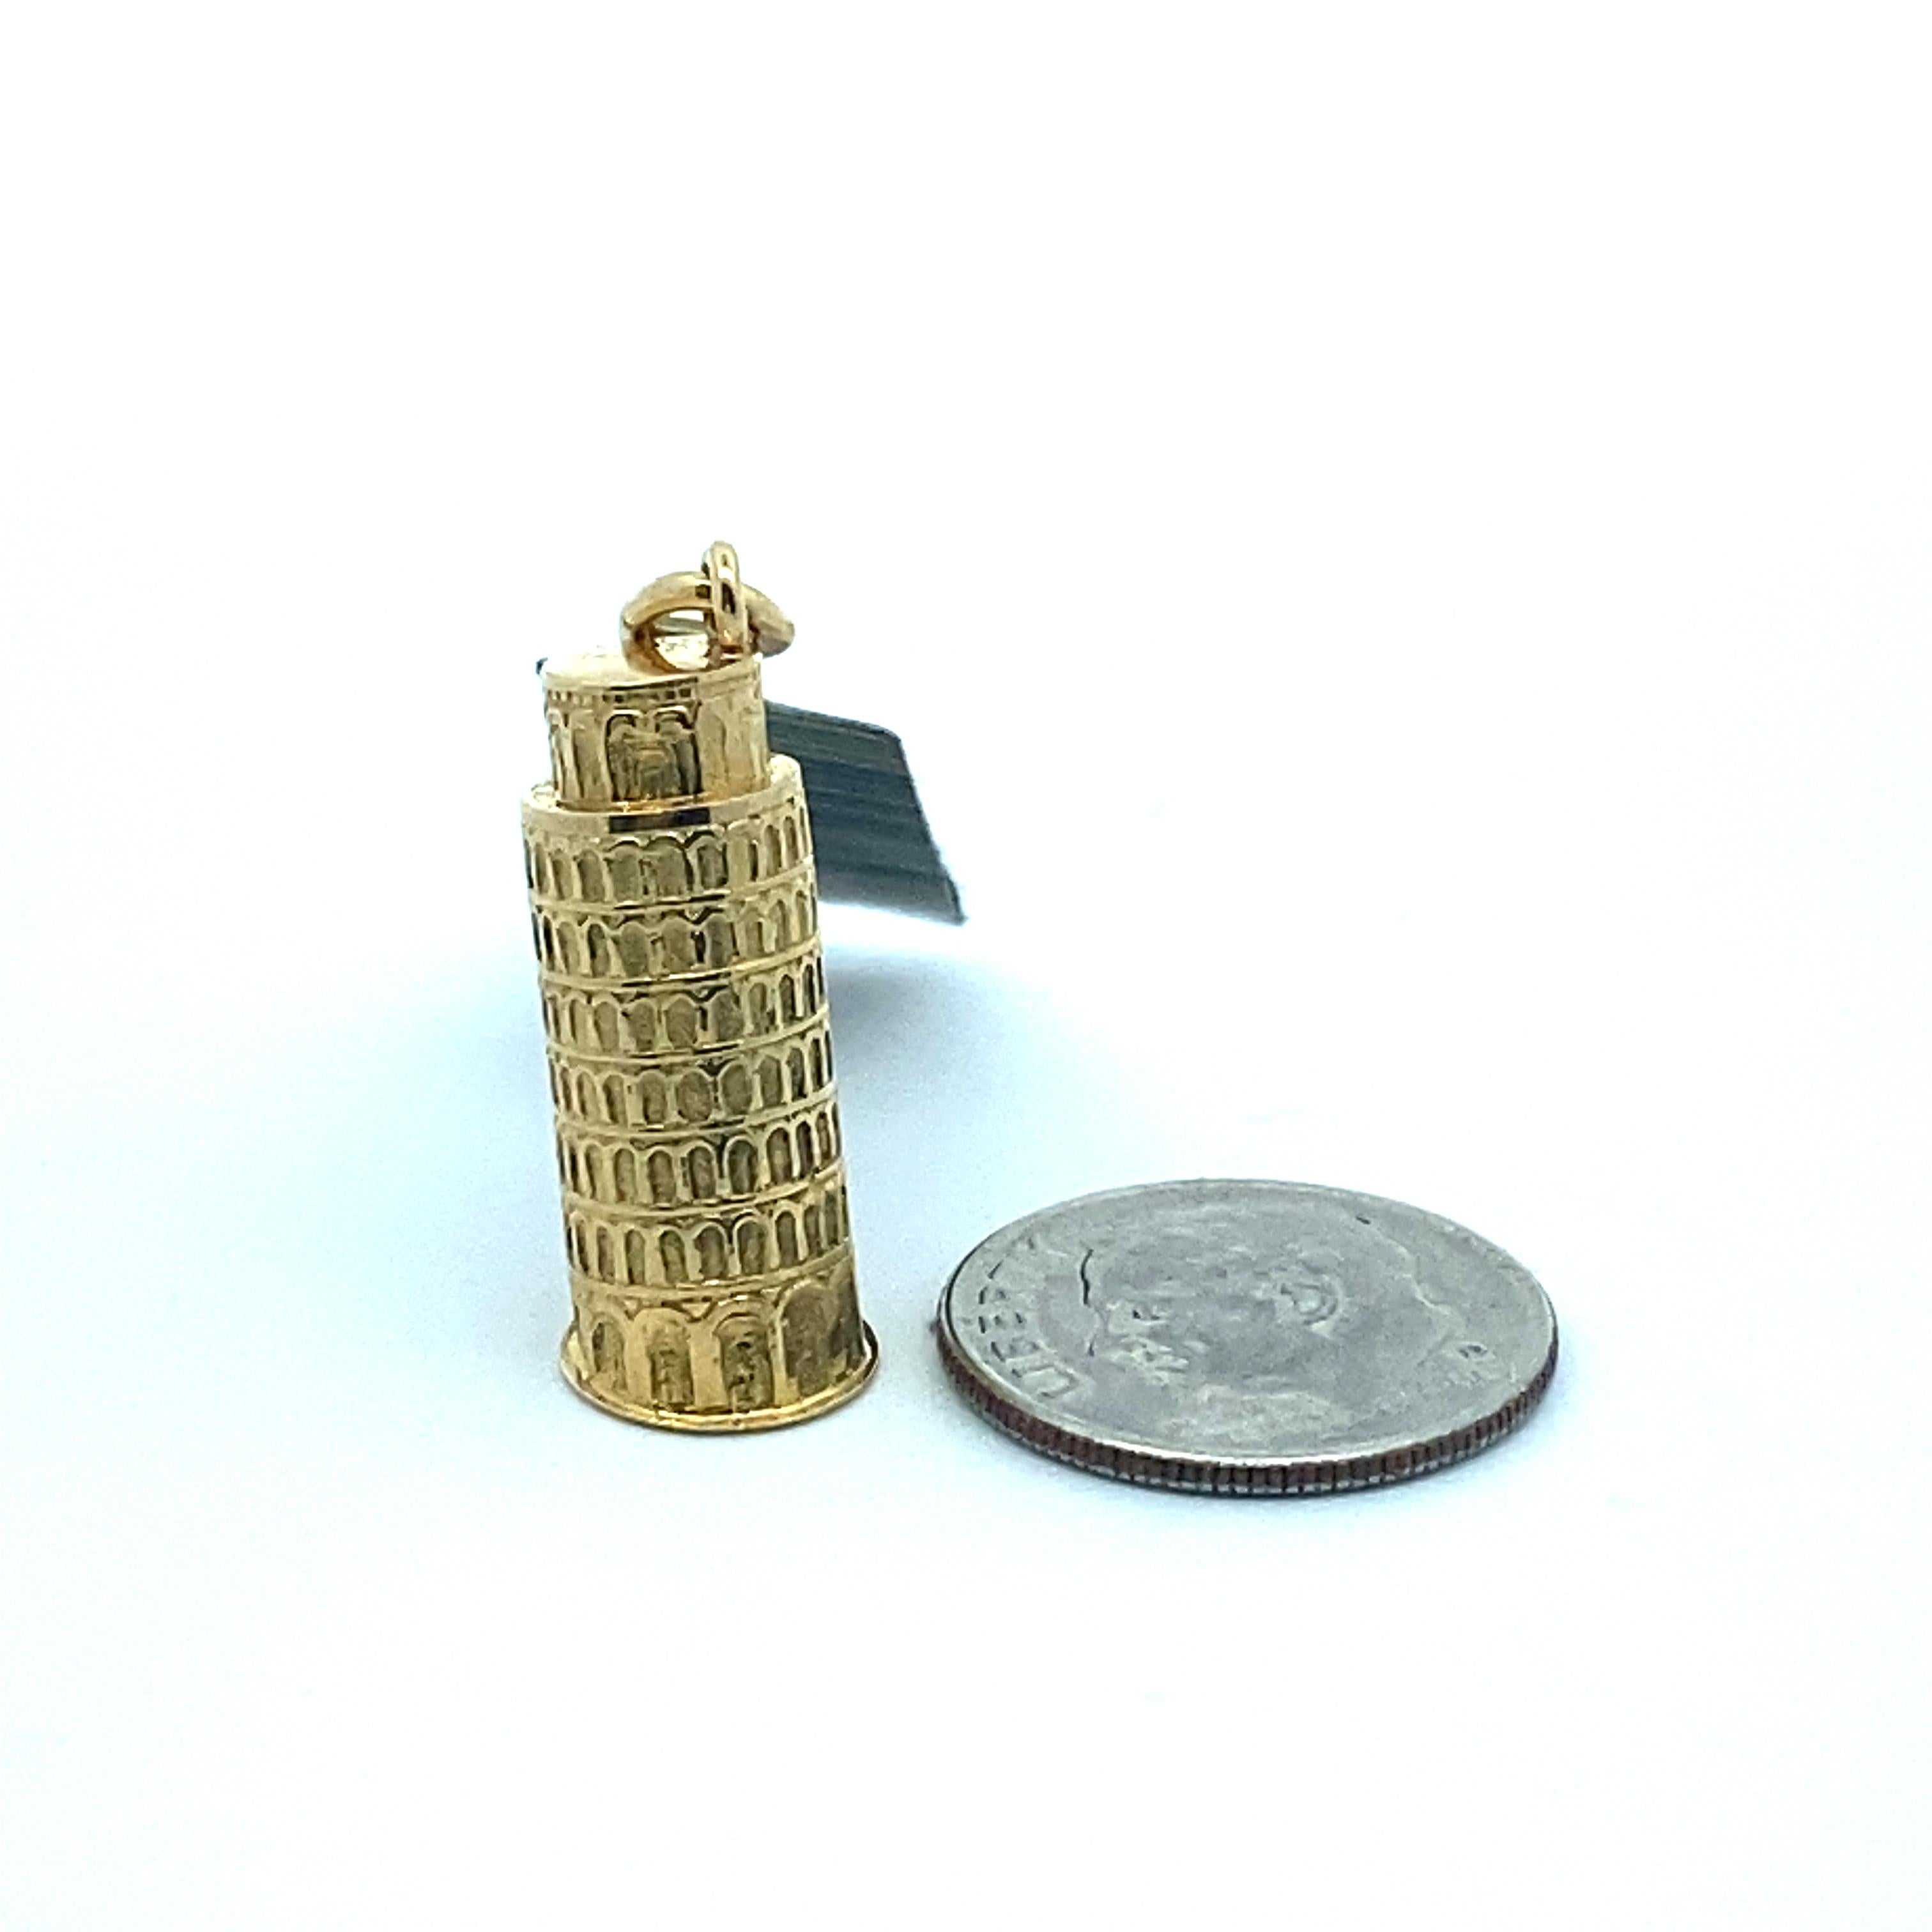 18k yellow gold Leaning Tower of Pisa charm pendant 2.9Dwt. Length 3/4 inches.